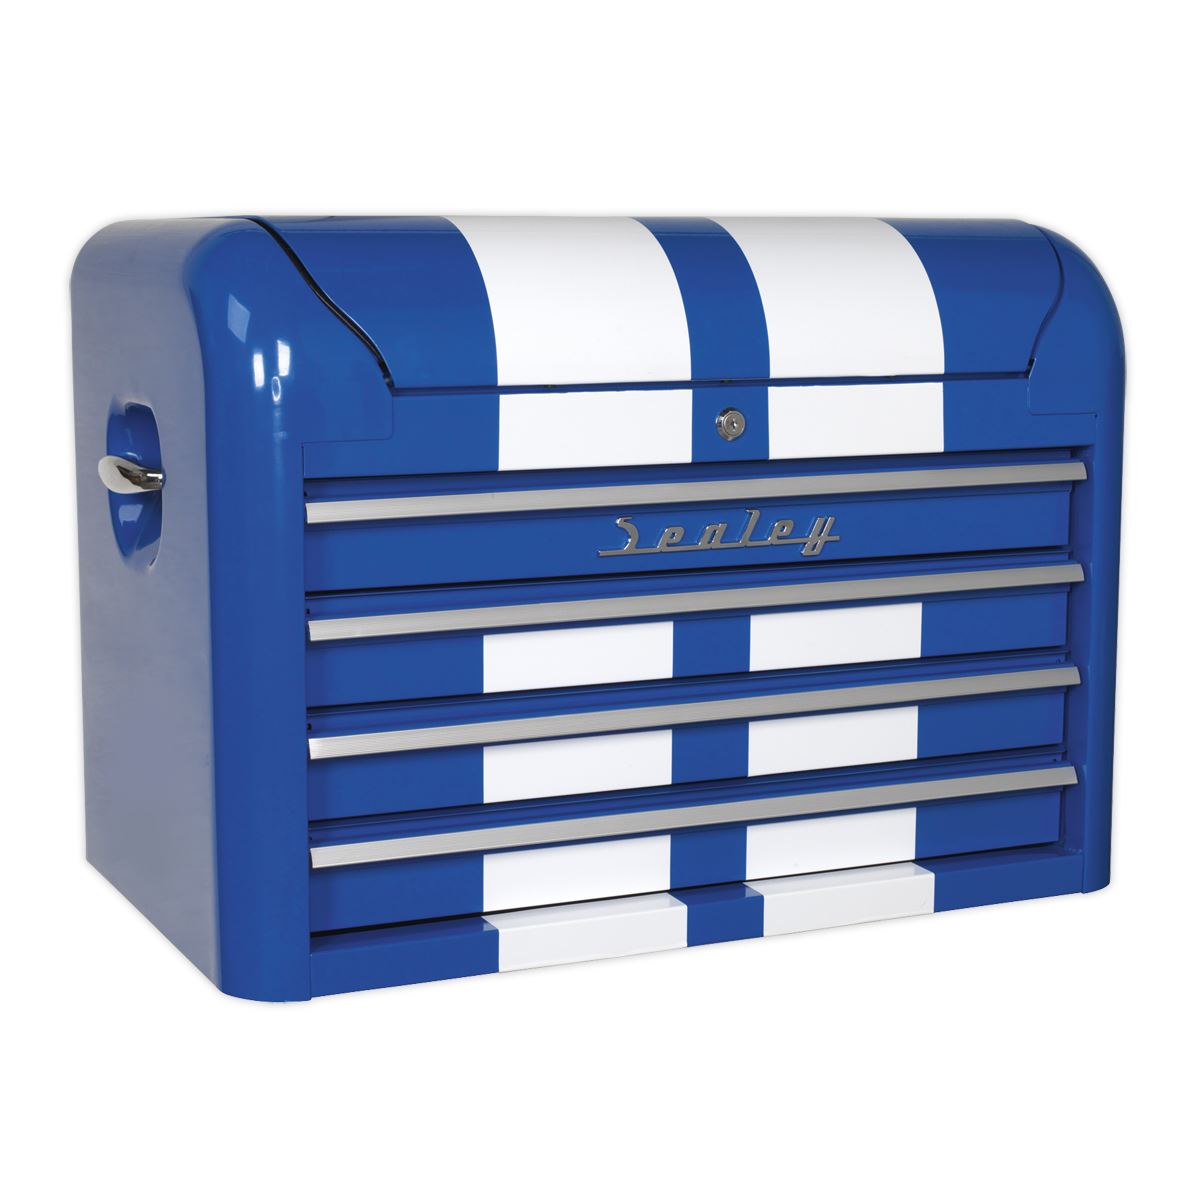 Sealey Premier Topchest 4 Drawer Retro Style - Blue with White Stripes